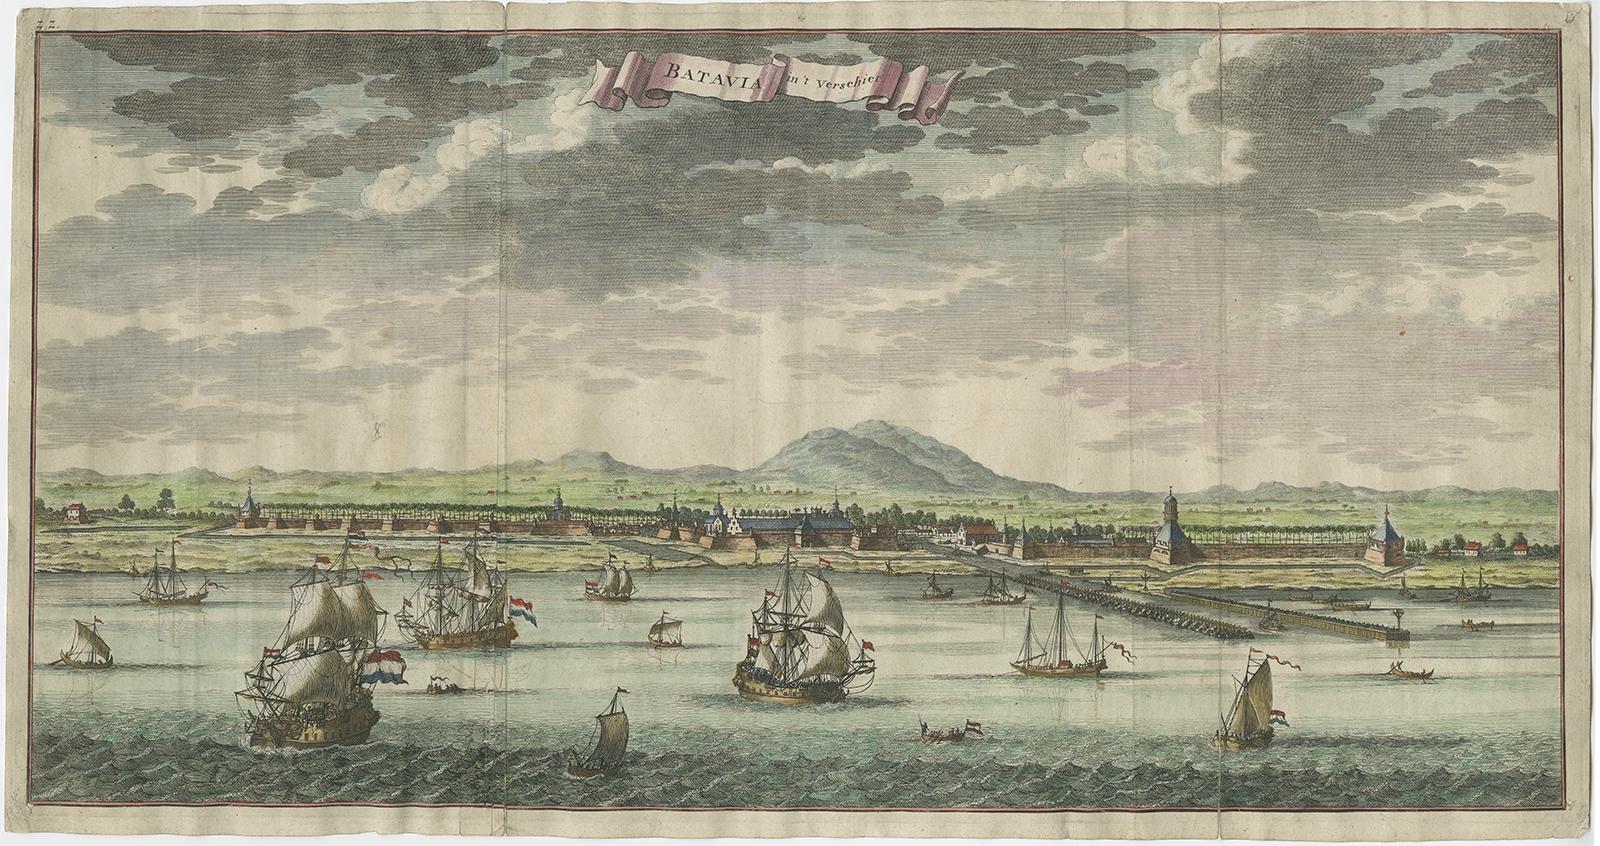 Antique print Indonesia titled 'Batavia in 't Verschiet'. 

Large panoramic view on Batavia, present day Jakarta, Indonesia. Originates from 'Oud en Nieuw Oost-Indiën (..)' by François Valentyn / Valentijn, published in 1724-1726. VOC.

Artists